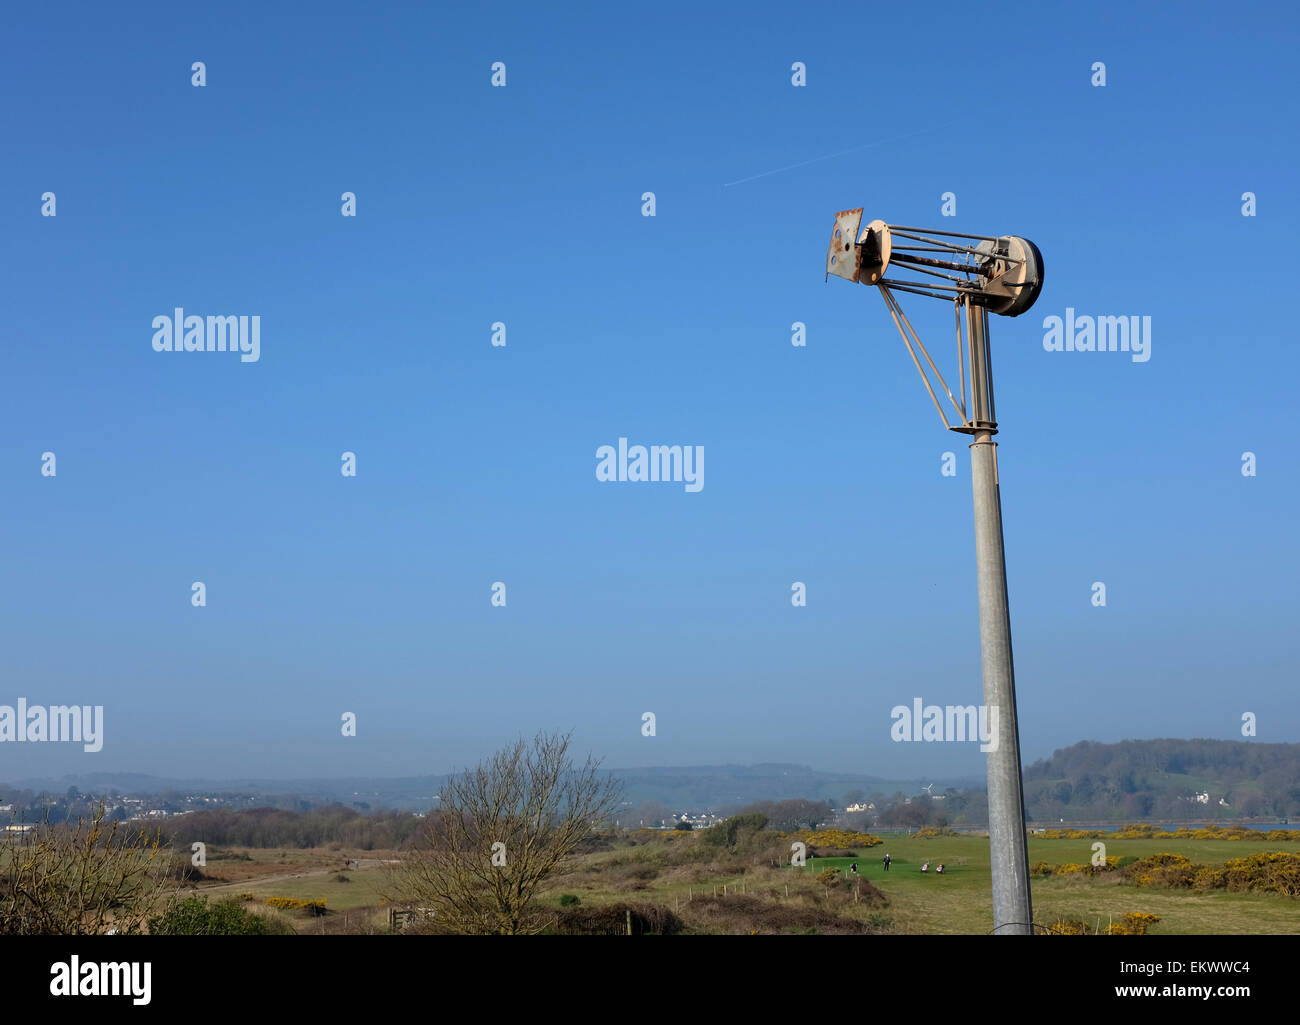 remains of a wind turbine damaged by coastal winds and weather against a blue sky Stock Photo